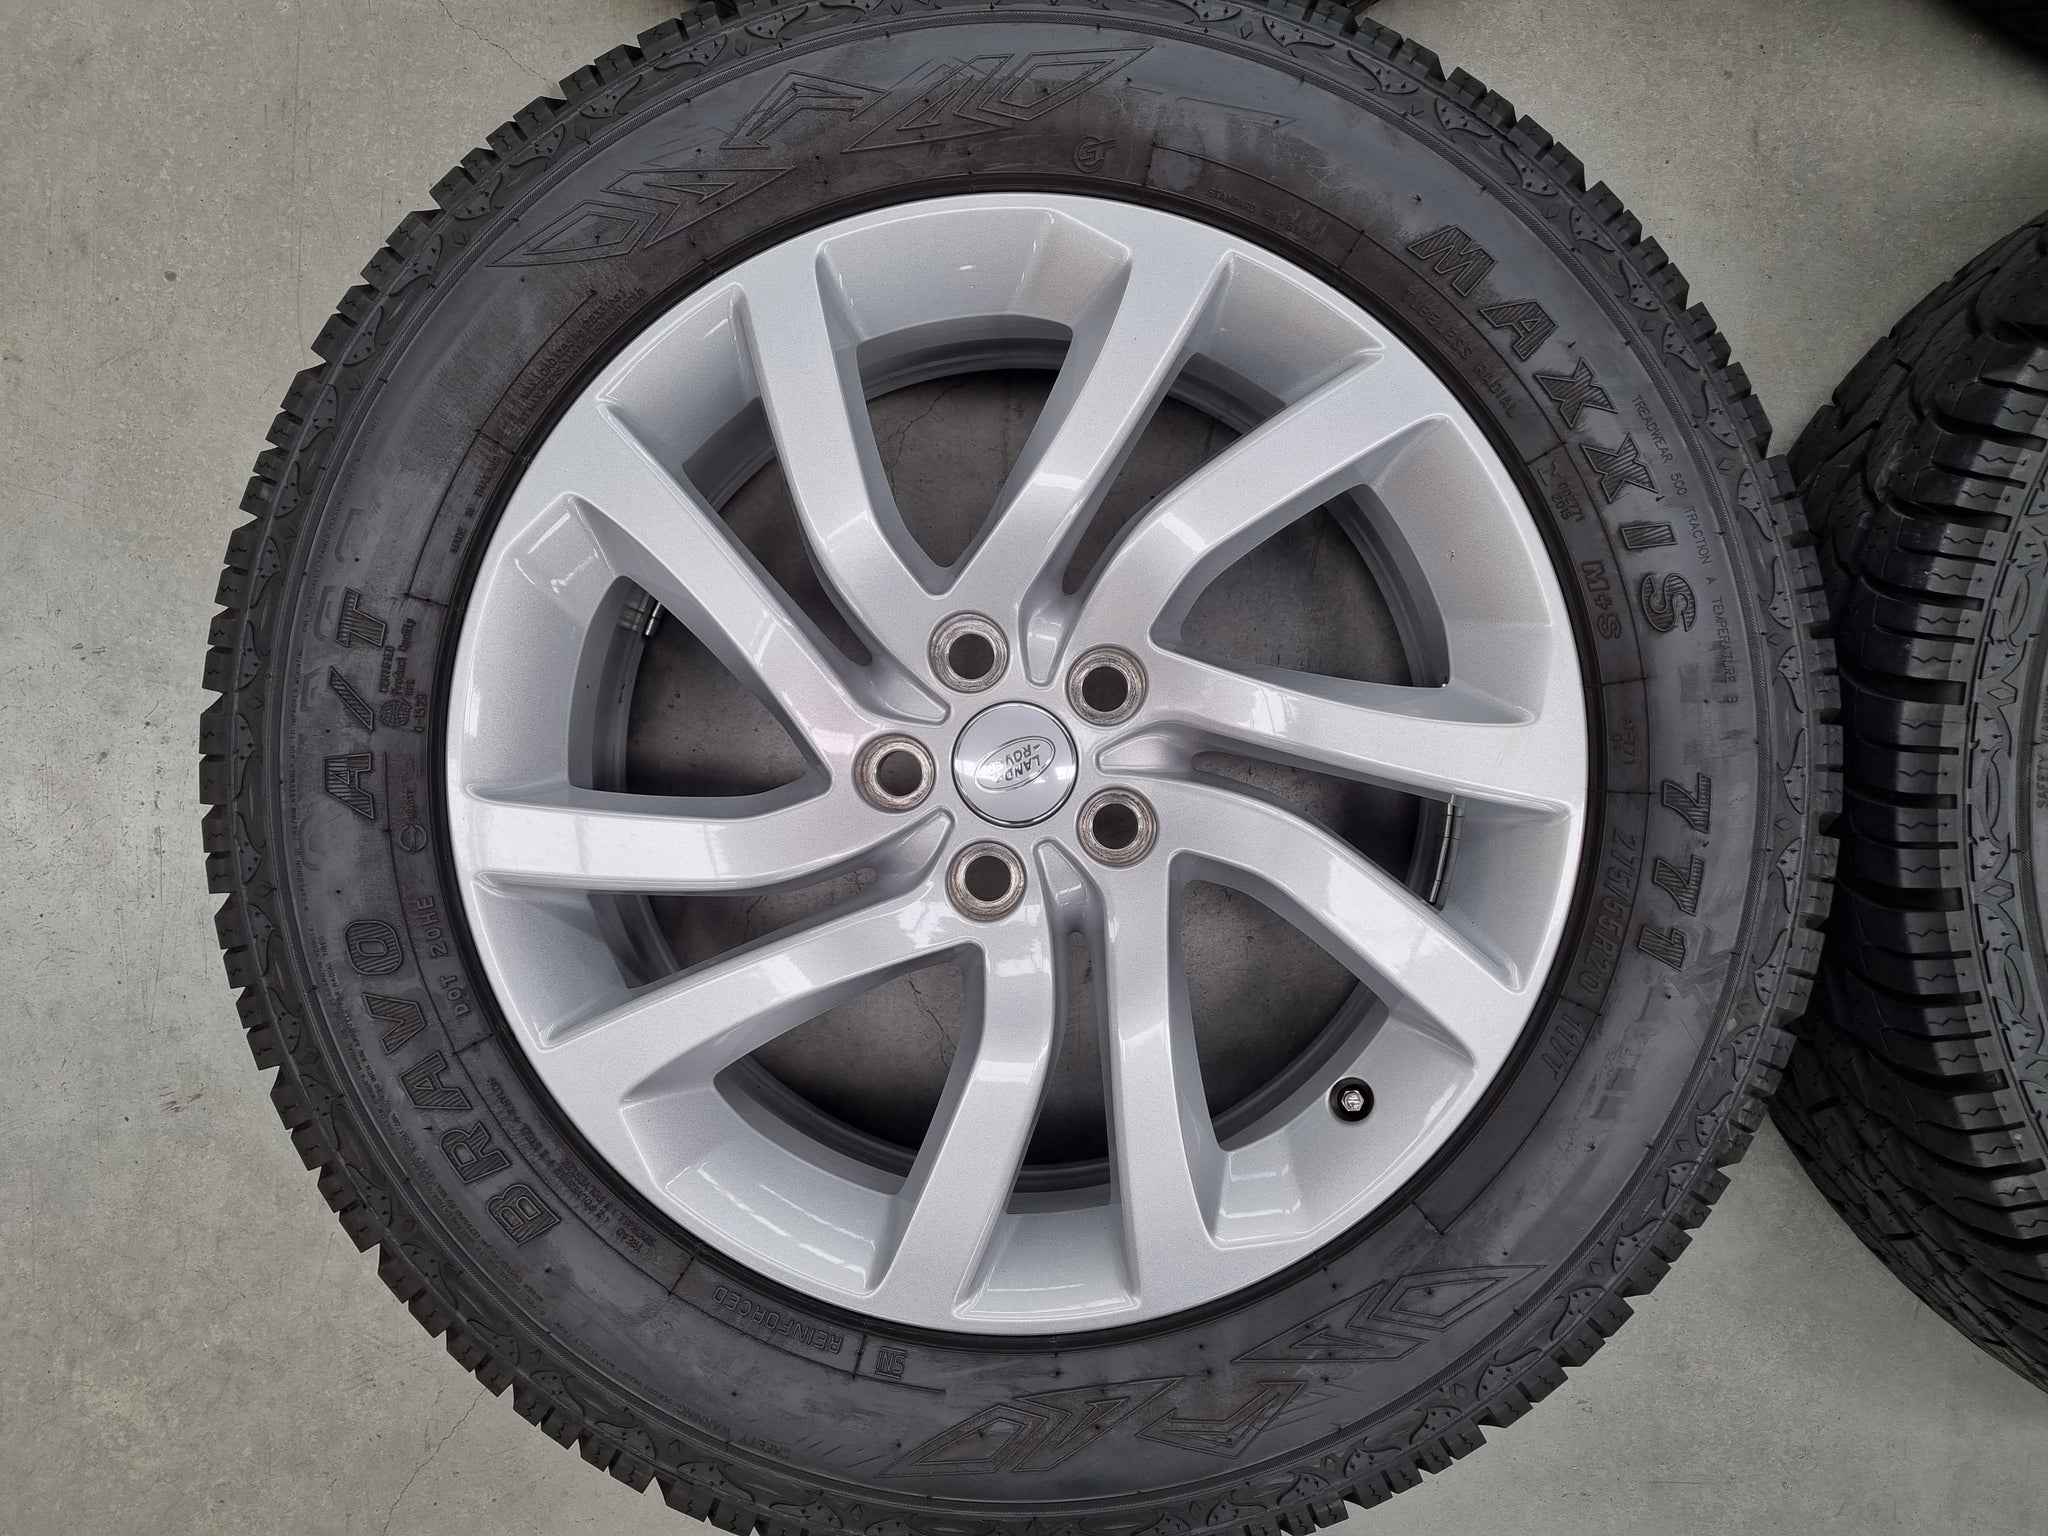 Load image into Gallery viewer, Genuine Land Rover Discovery 5 Silver 20 Inch Wheels and 275/55R20 Tyres Set of 4
